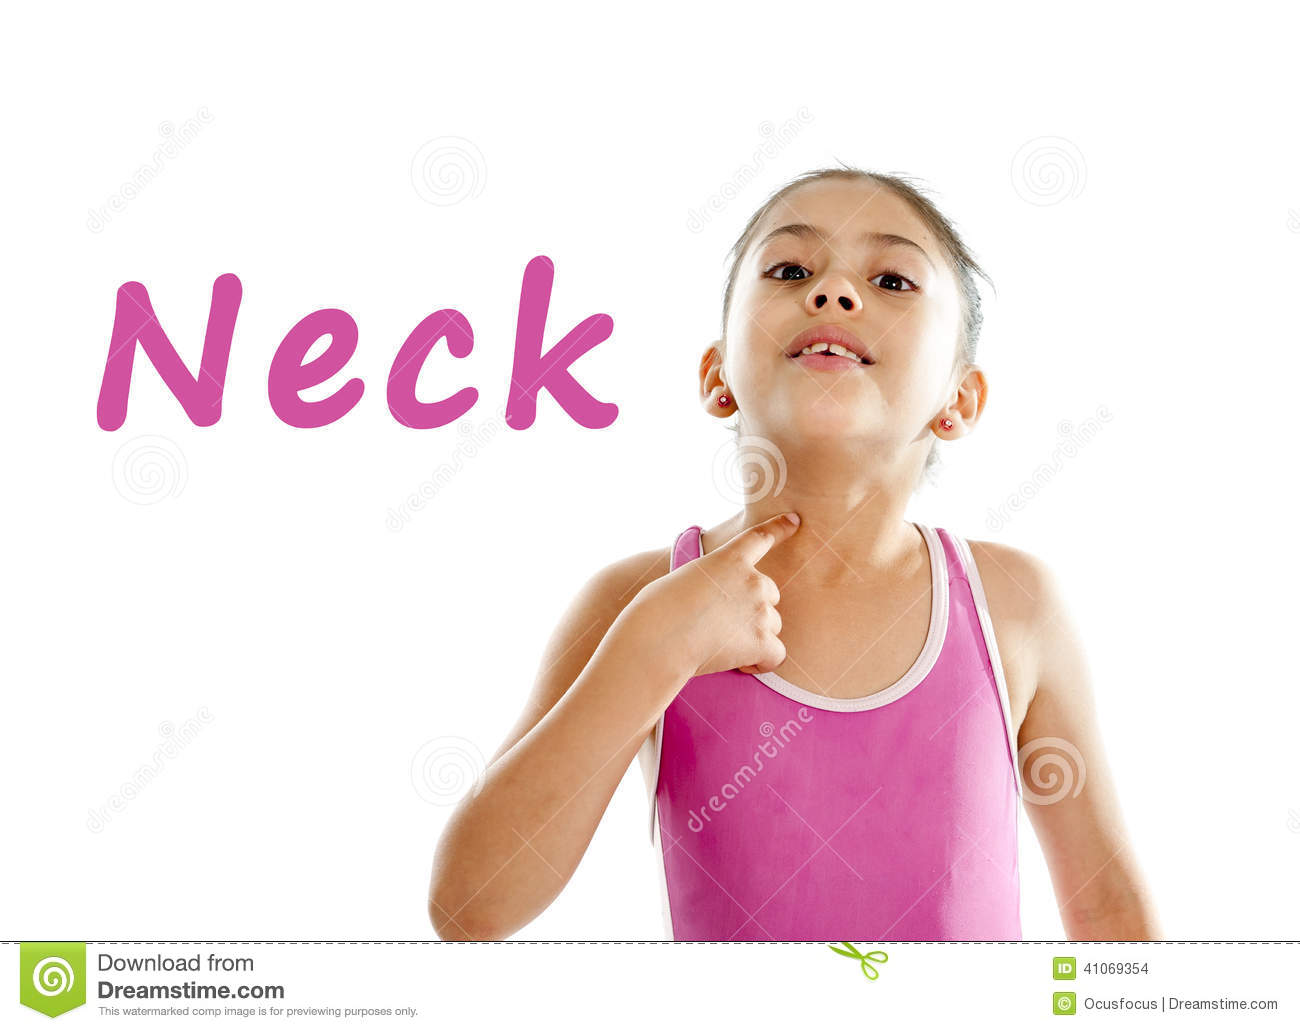     Neck And Throat On A White Background For A School Anatomy Or Body